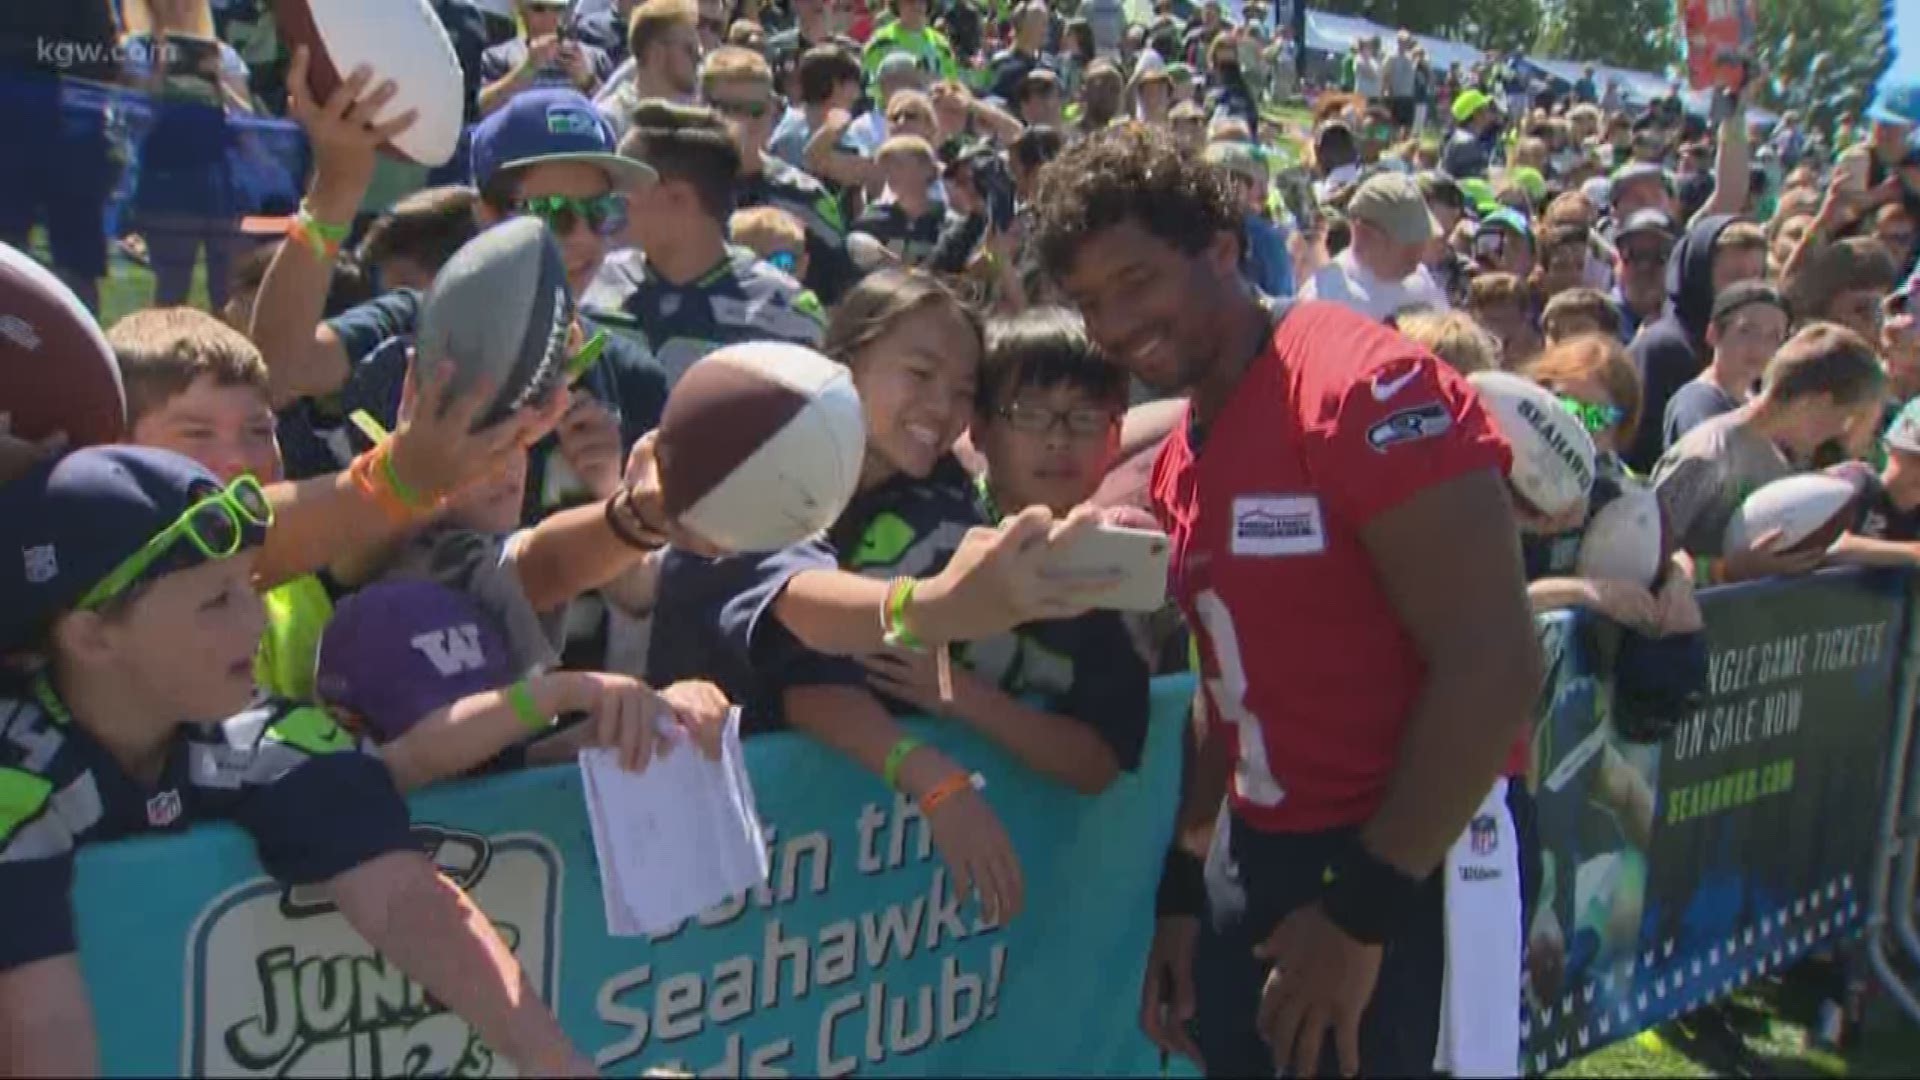 The Seattle Seahawks opened training camp. KGW’s Orlando Sanchez was there.